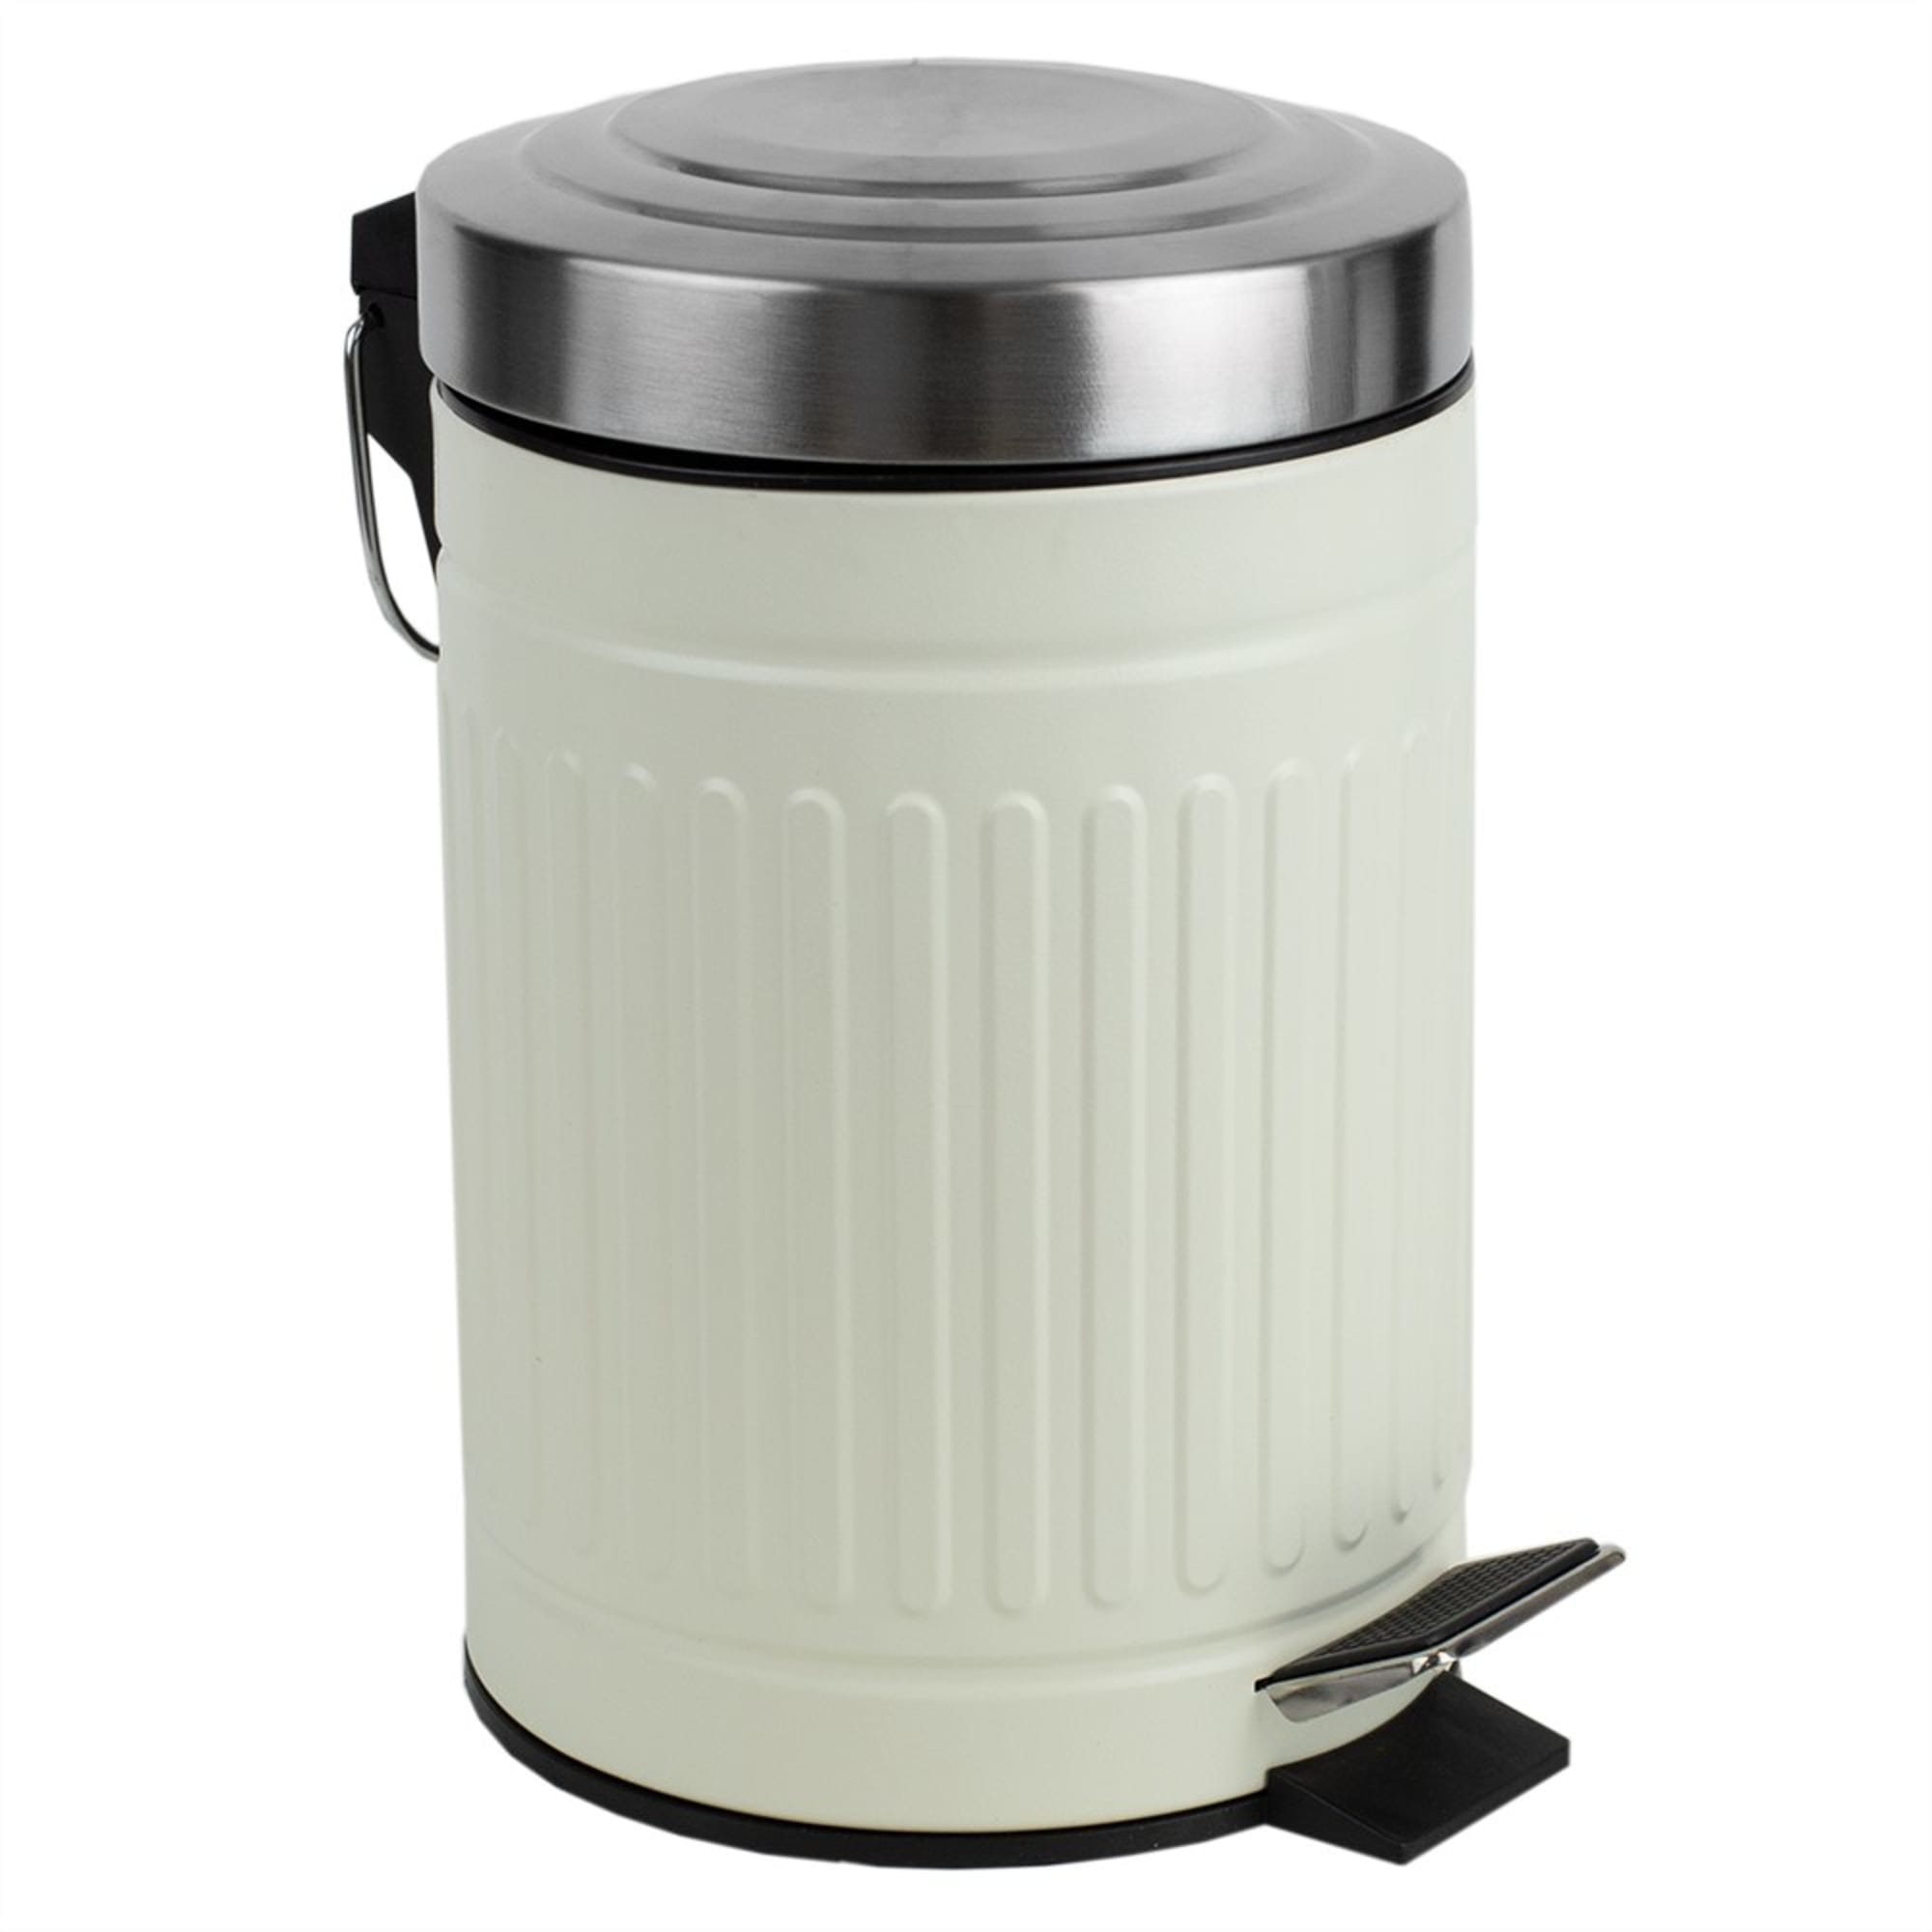 Home Basics 3 LT Embossed Ivory Step on Steel Waste Bin with Carrying Handle $8 EACH, CASE PACK OF 6